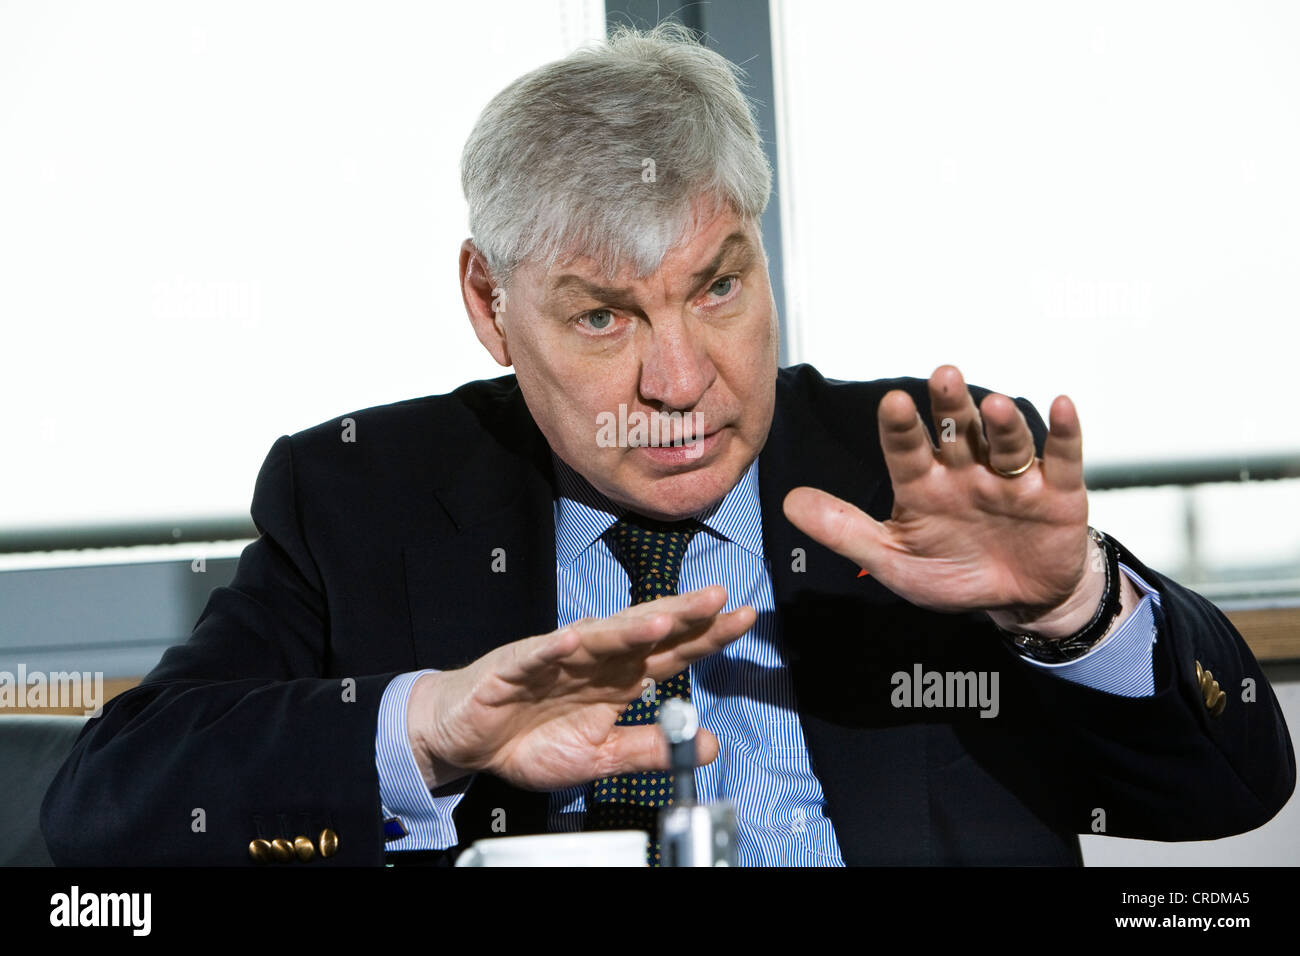 Michael Sommer, chairman of the German Trade Union Federation, in interview, Berlin, Germany, Europe Stock Photo